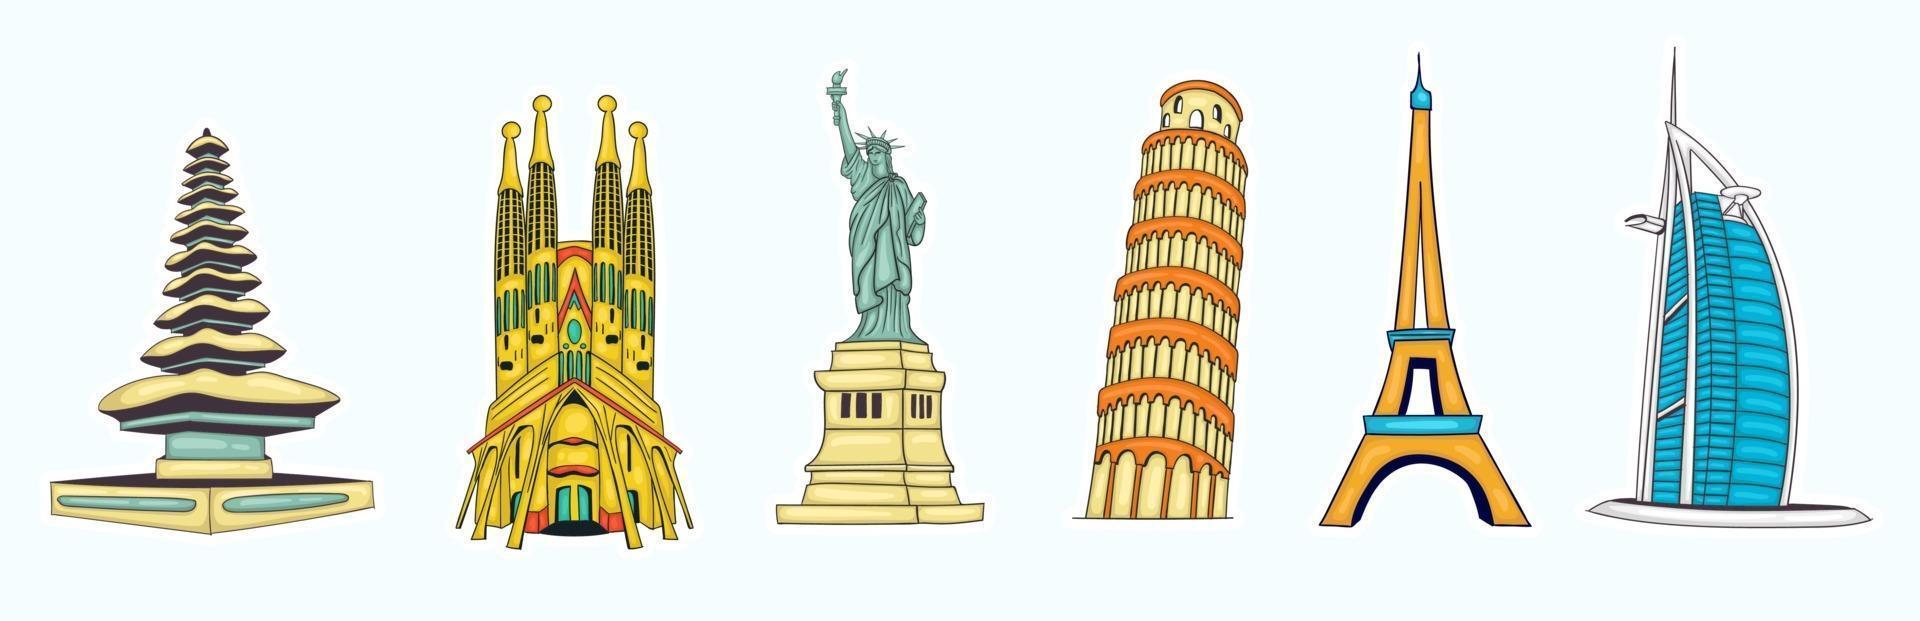 Colorful Hand Drawn World Landmarks Collection vector